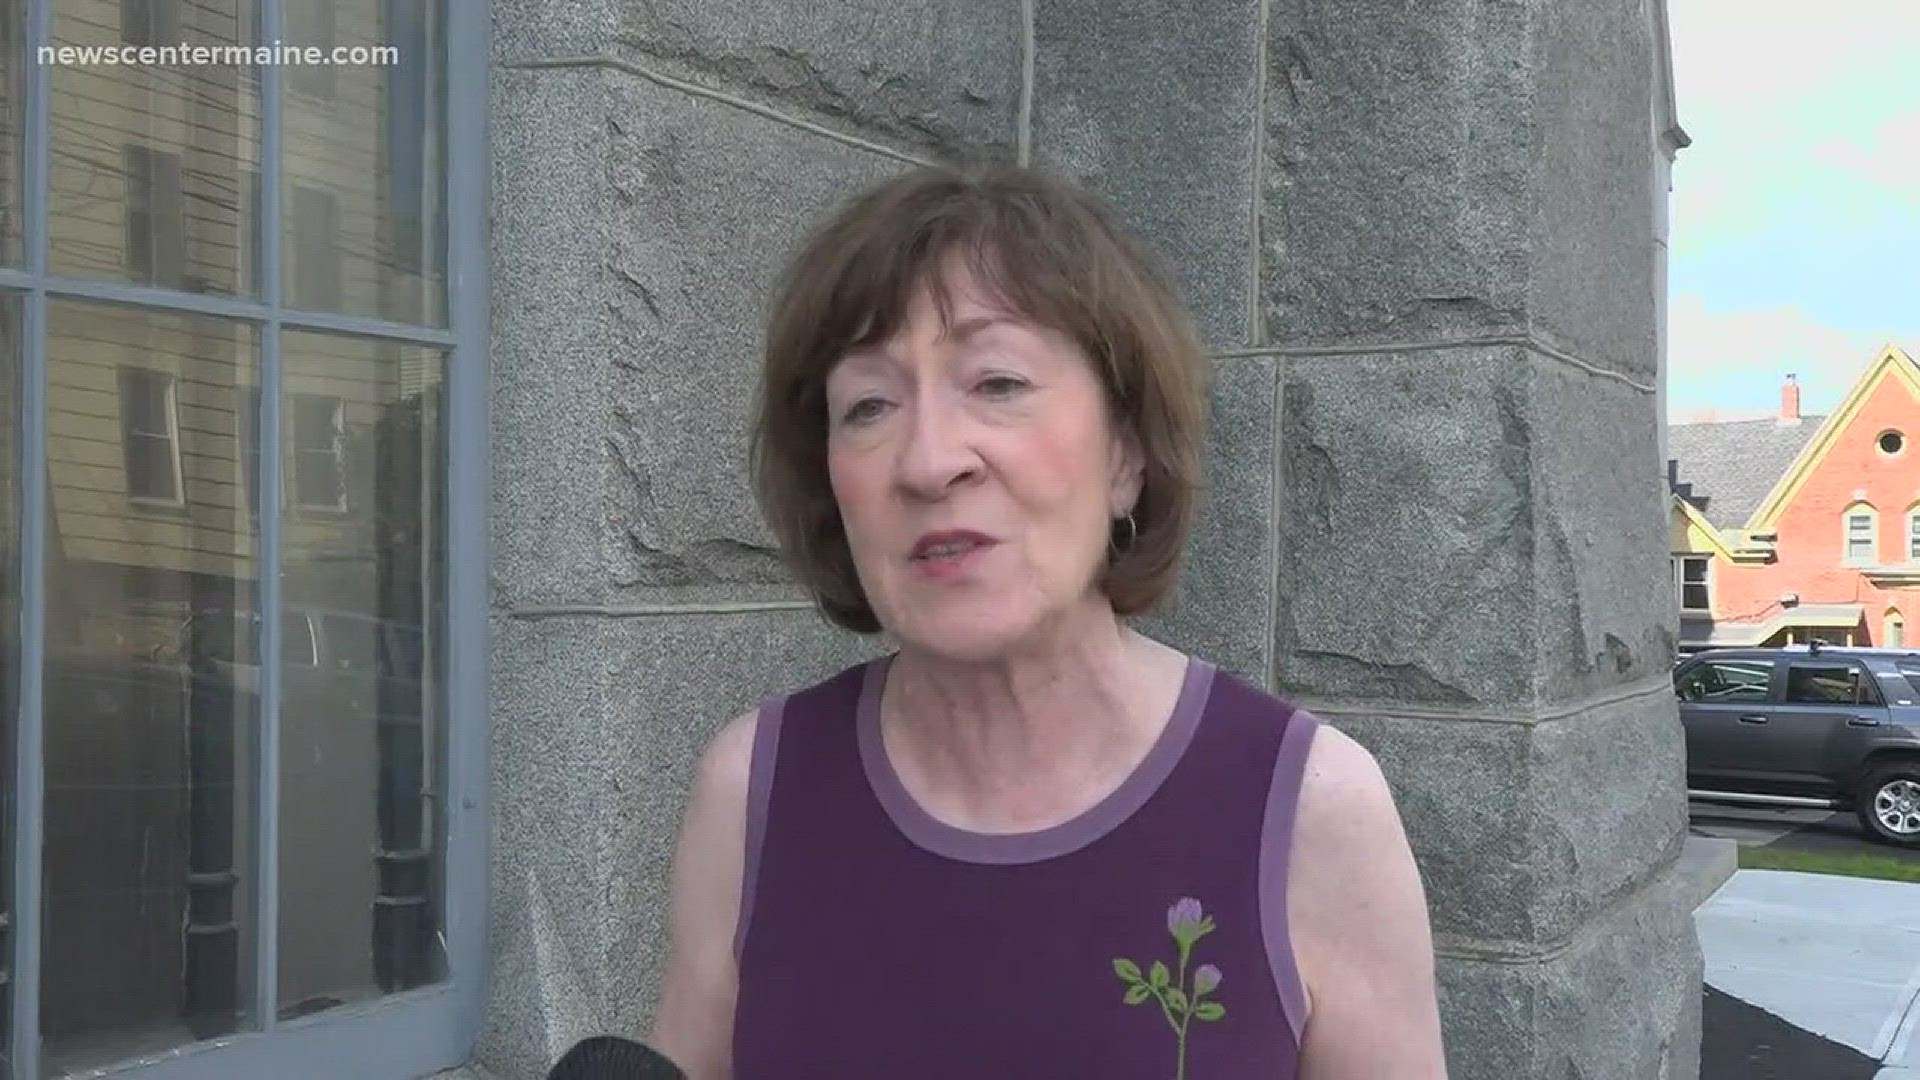 Collins close to decision on Kavanaugh